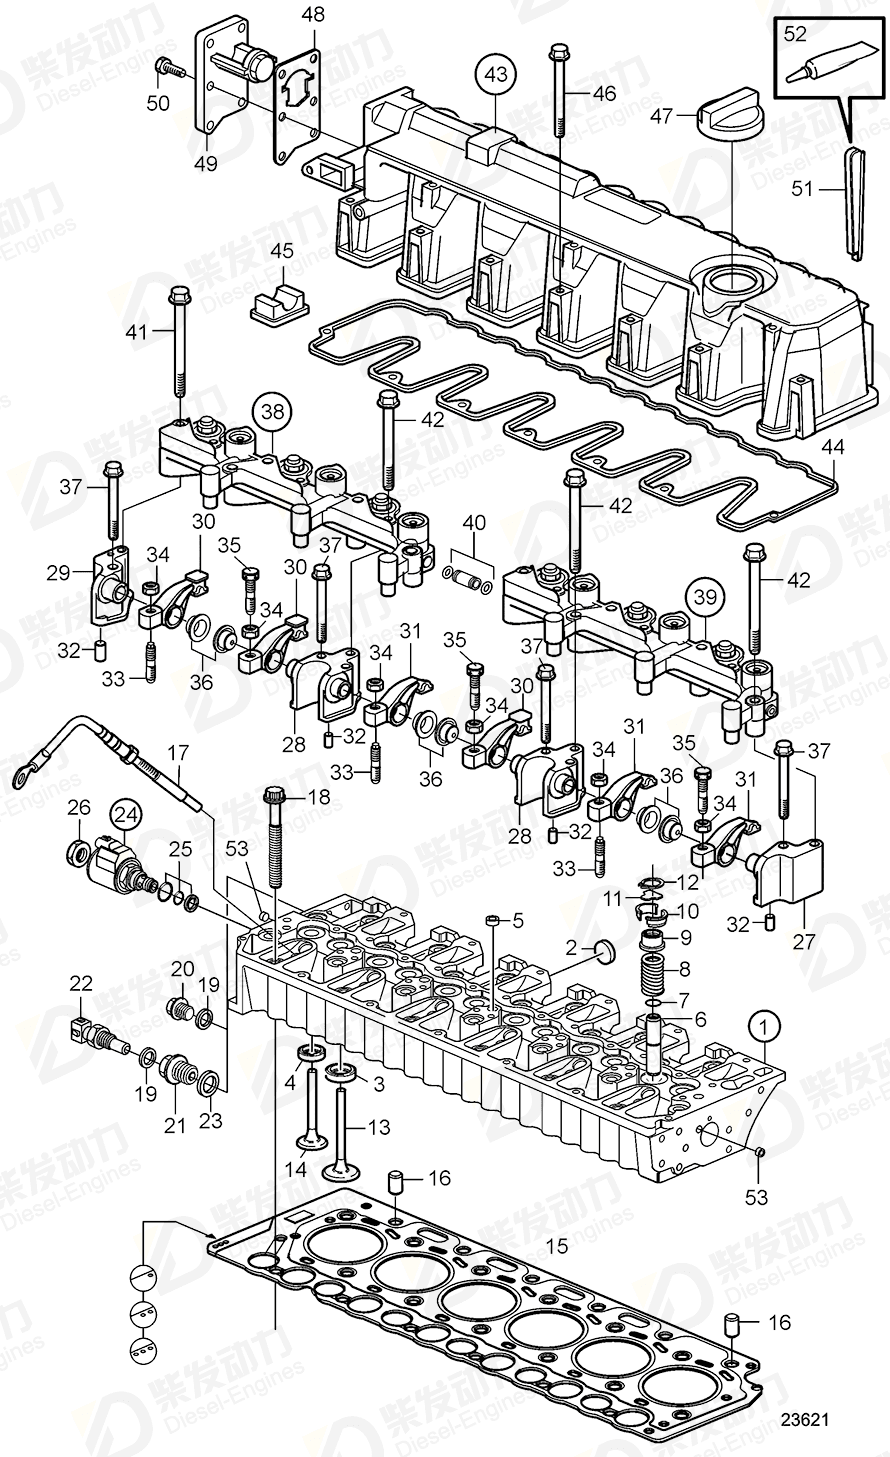 VOLVO Valve Cover 21134640 Drawing